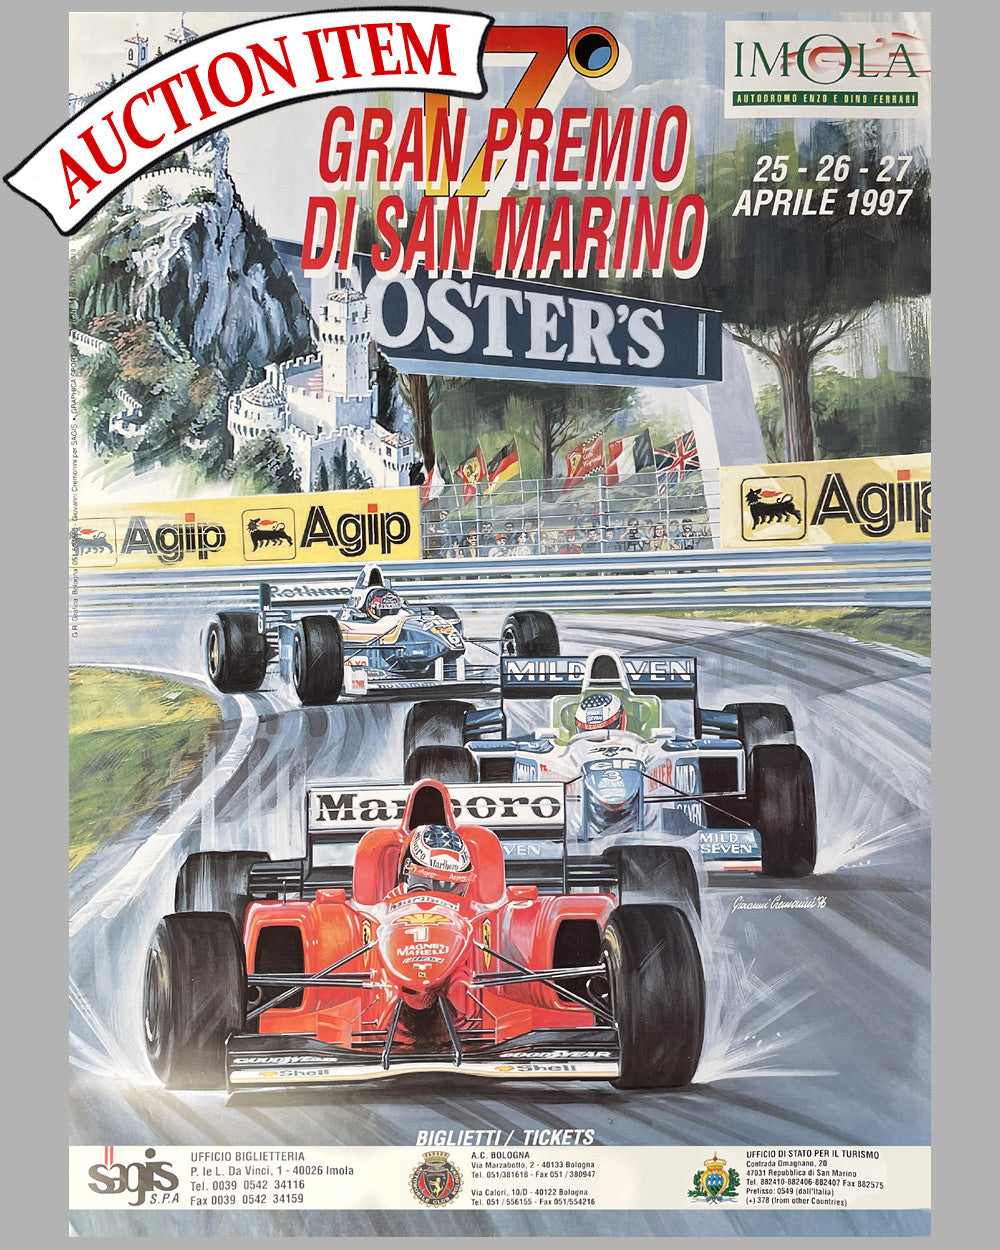 7 - 17th Grand Prix of San Marino 1997 official race poster by Giovanni Cremonini, Italy